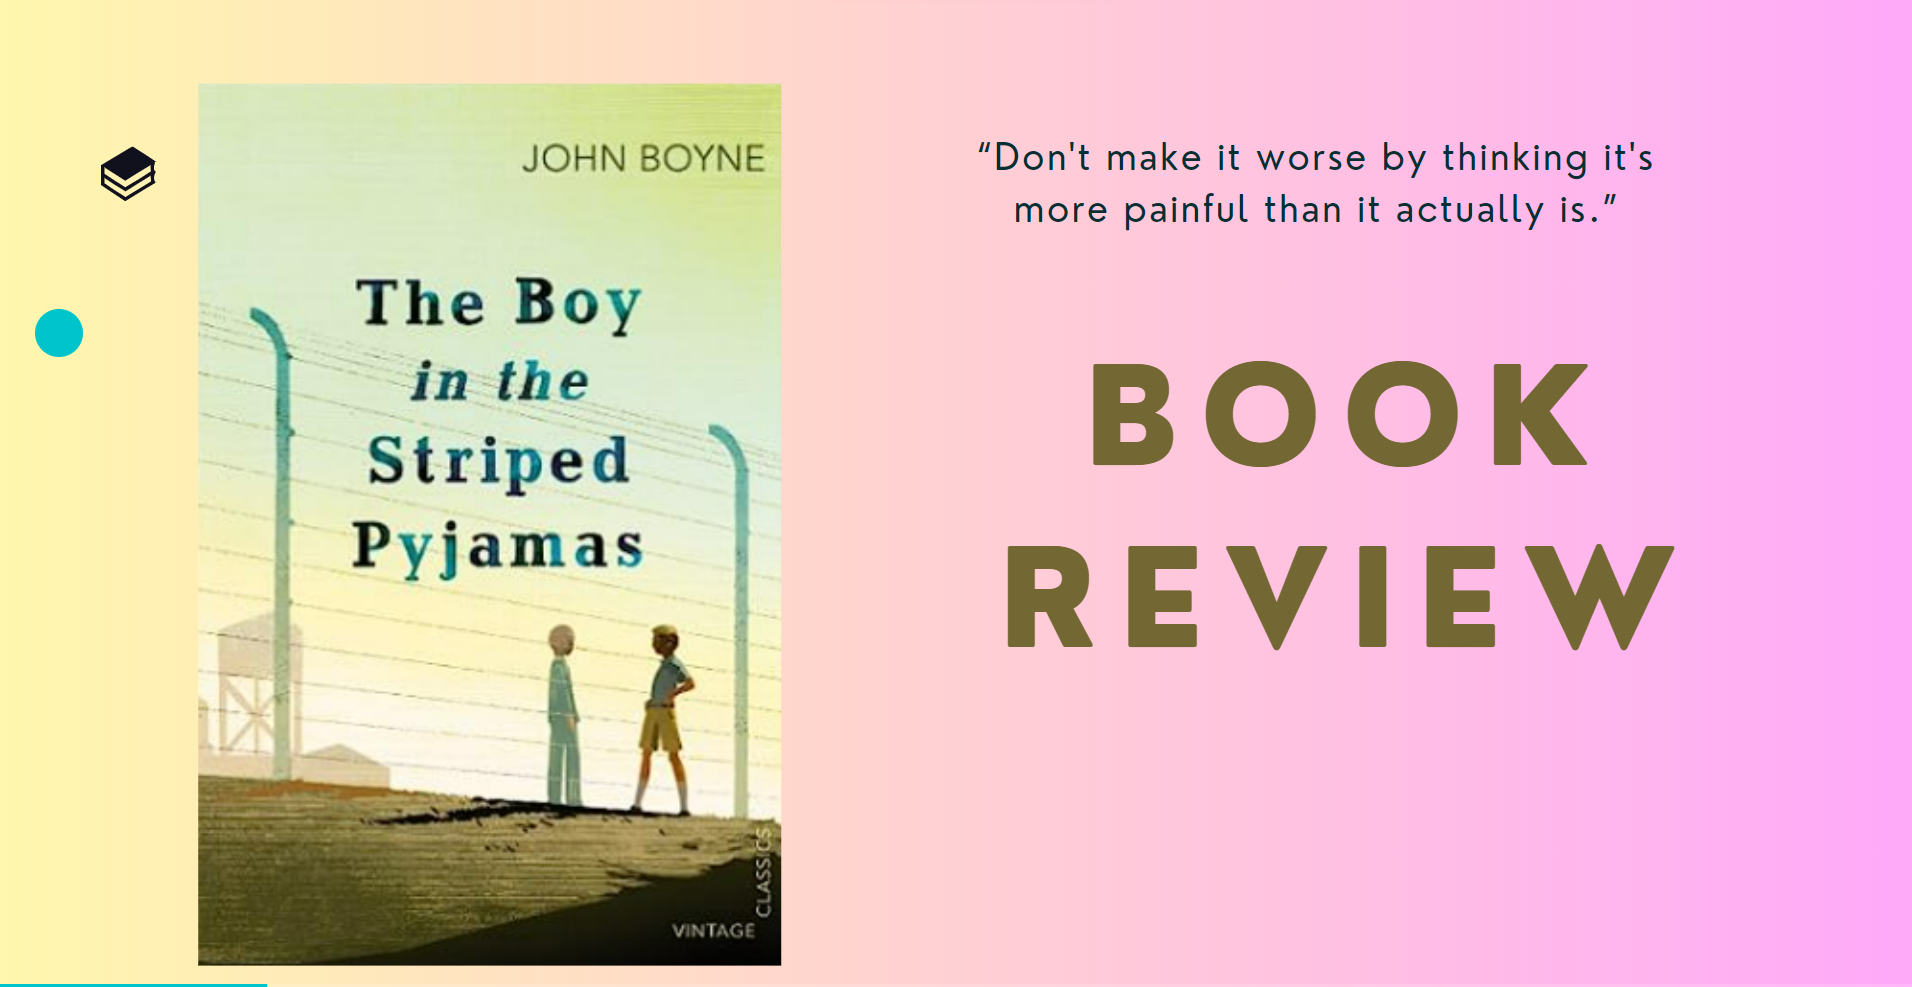 The boy in the striped pyjamas book review